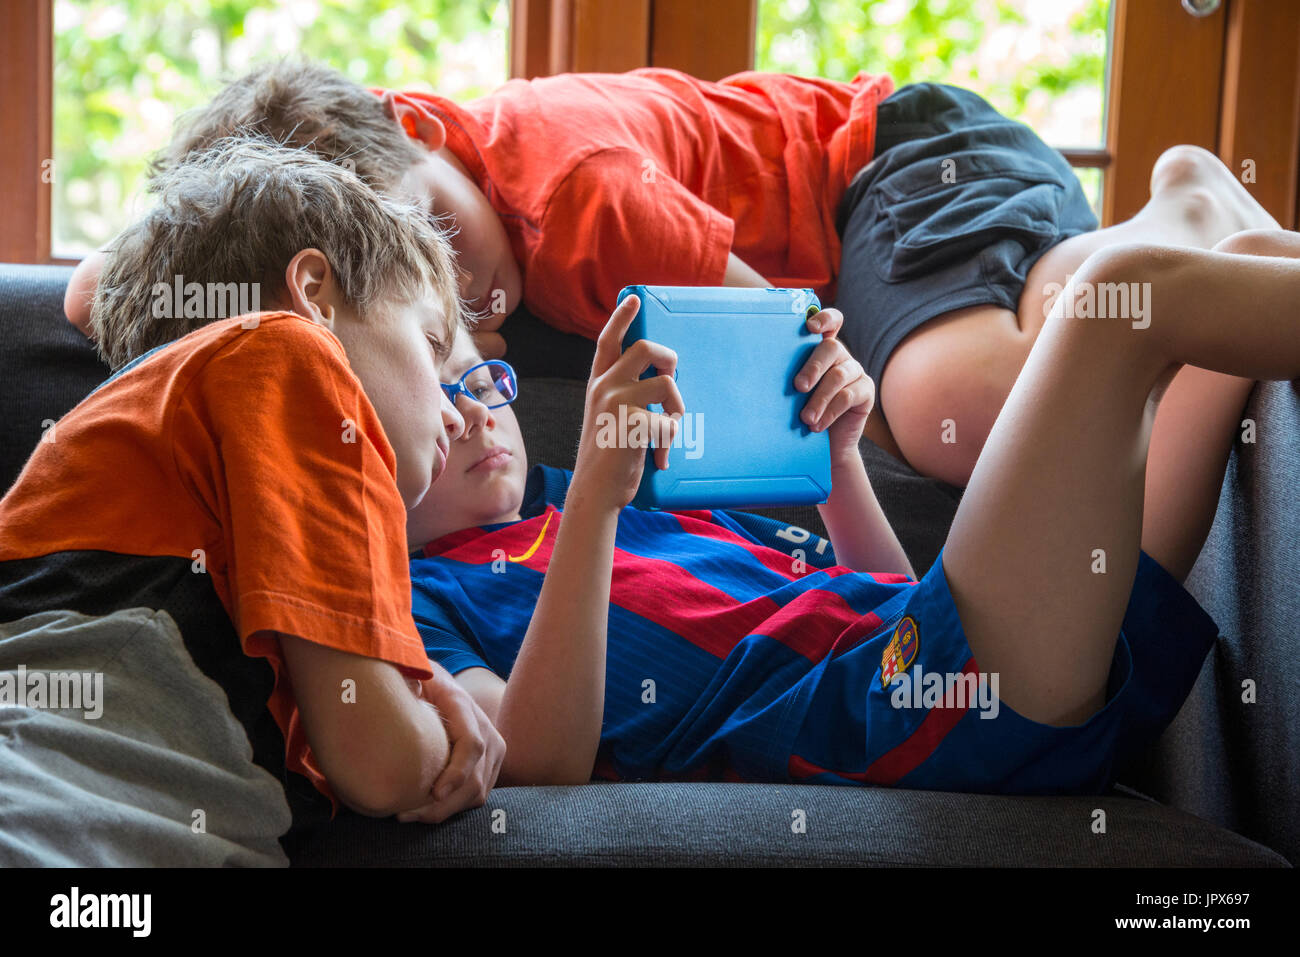 Young Boy playing computer games on iPad with other boys watching, close-up Stock Photo